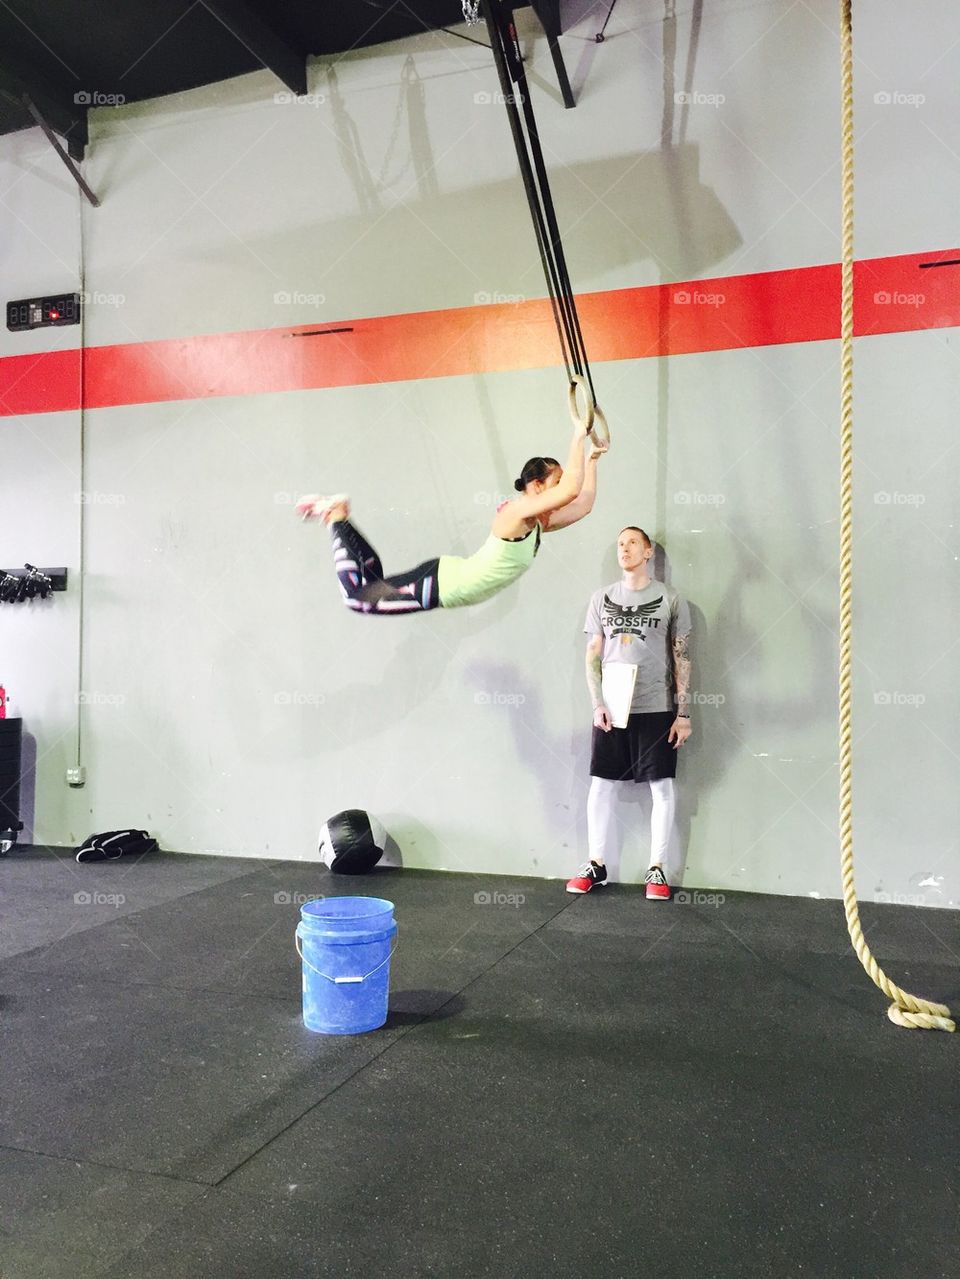 Muscle ups for days